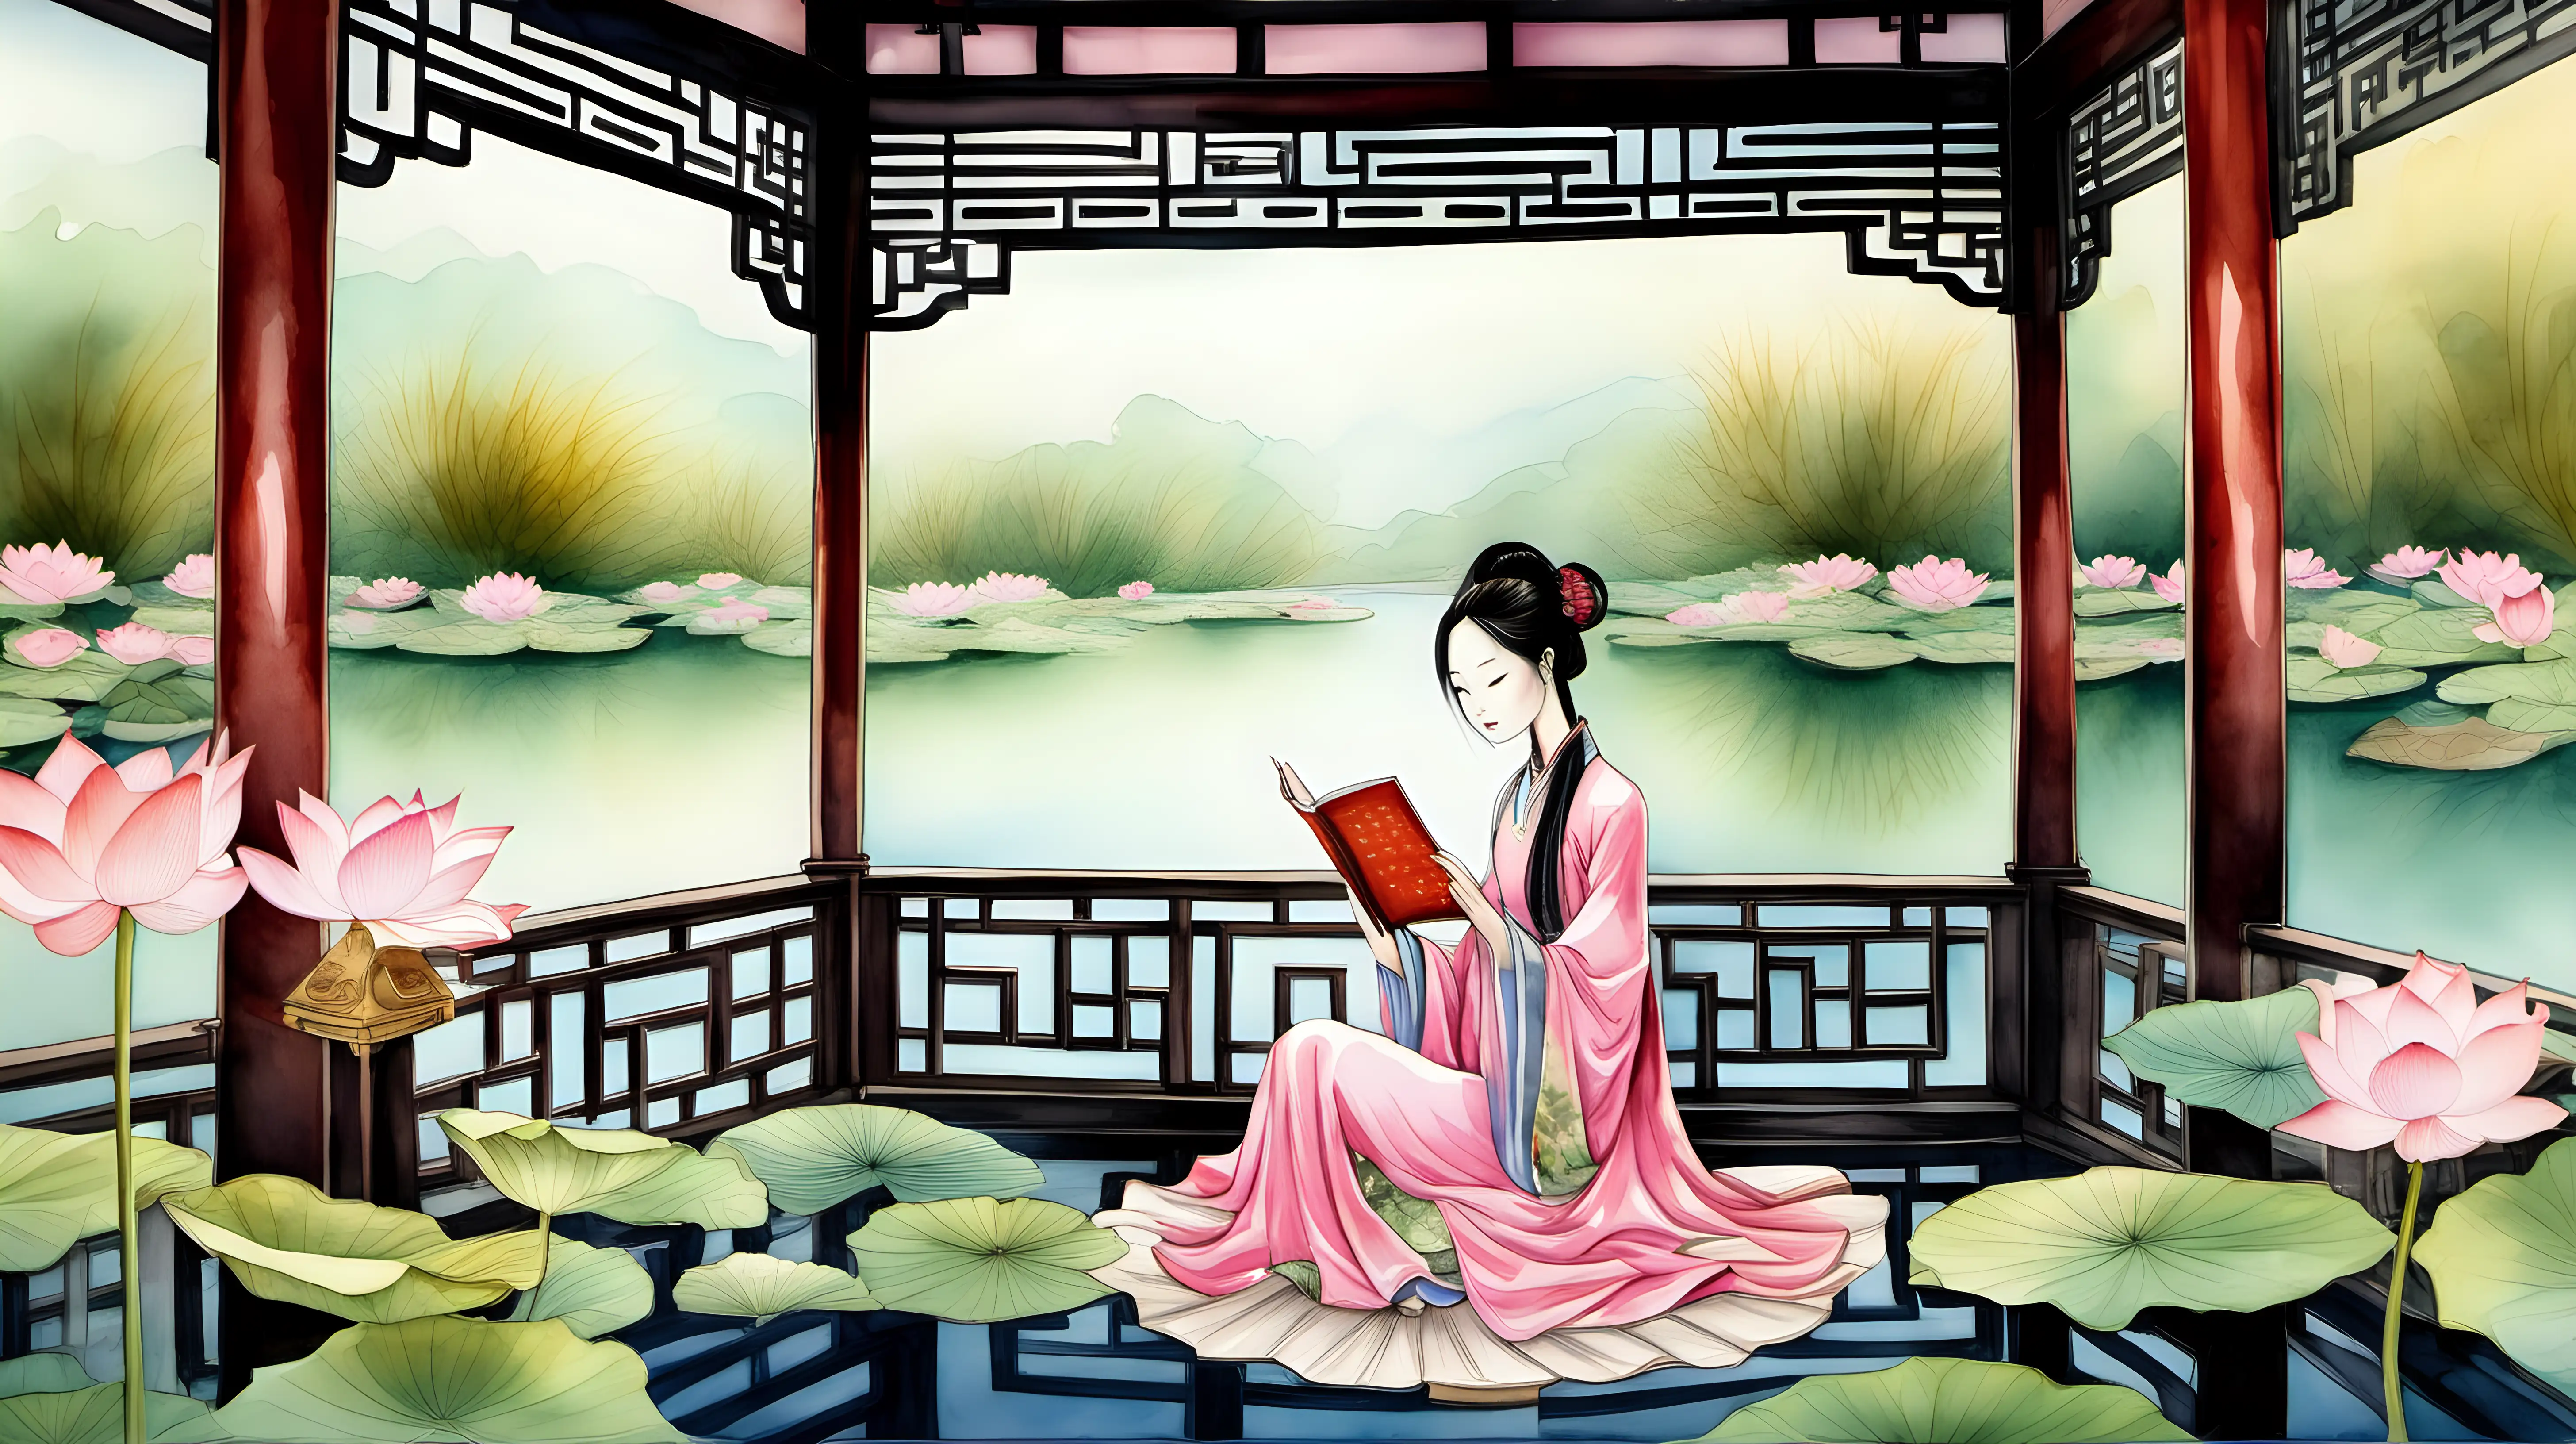 Serene Chinese Princess Reading Book Surrounded by Lotus Flowers in Beautiful Gazebo